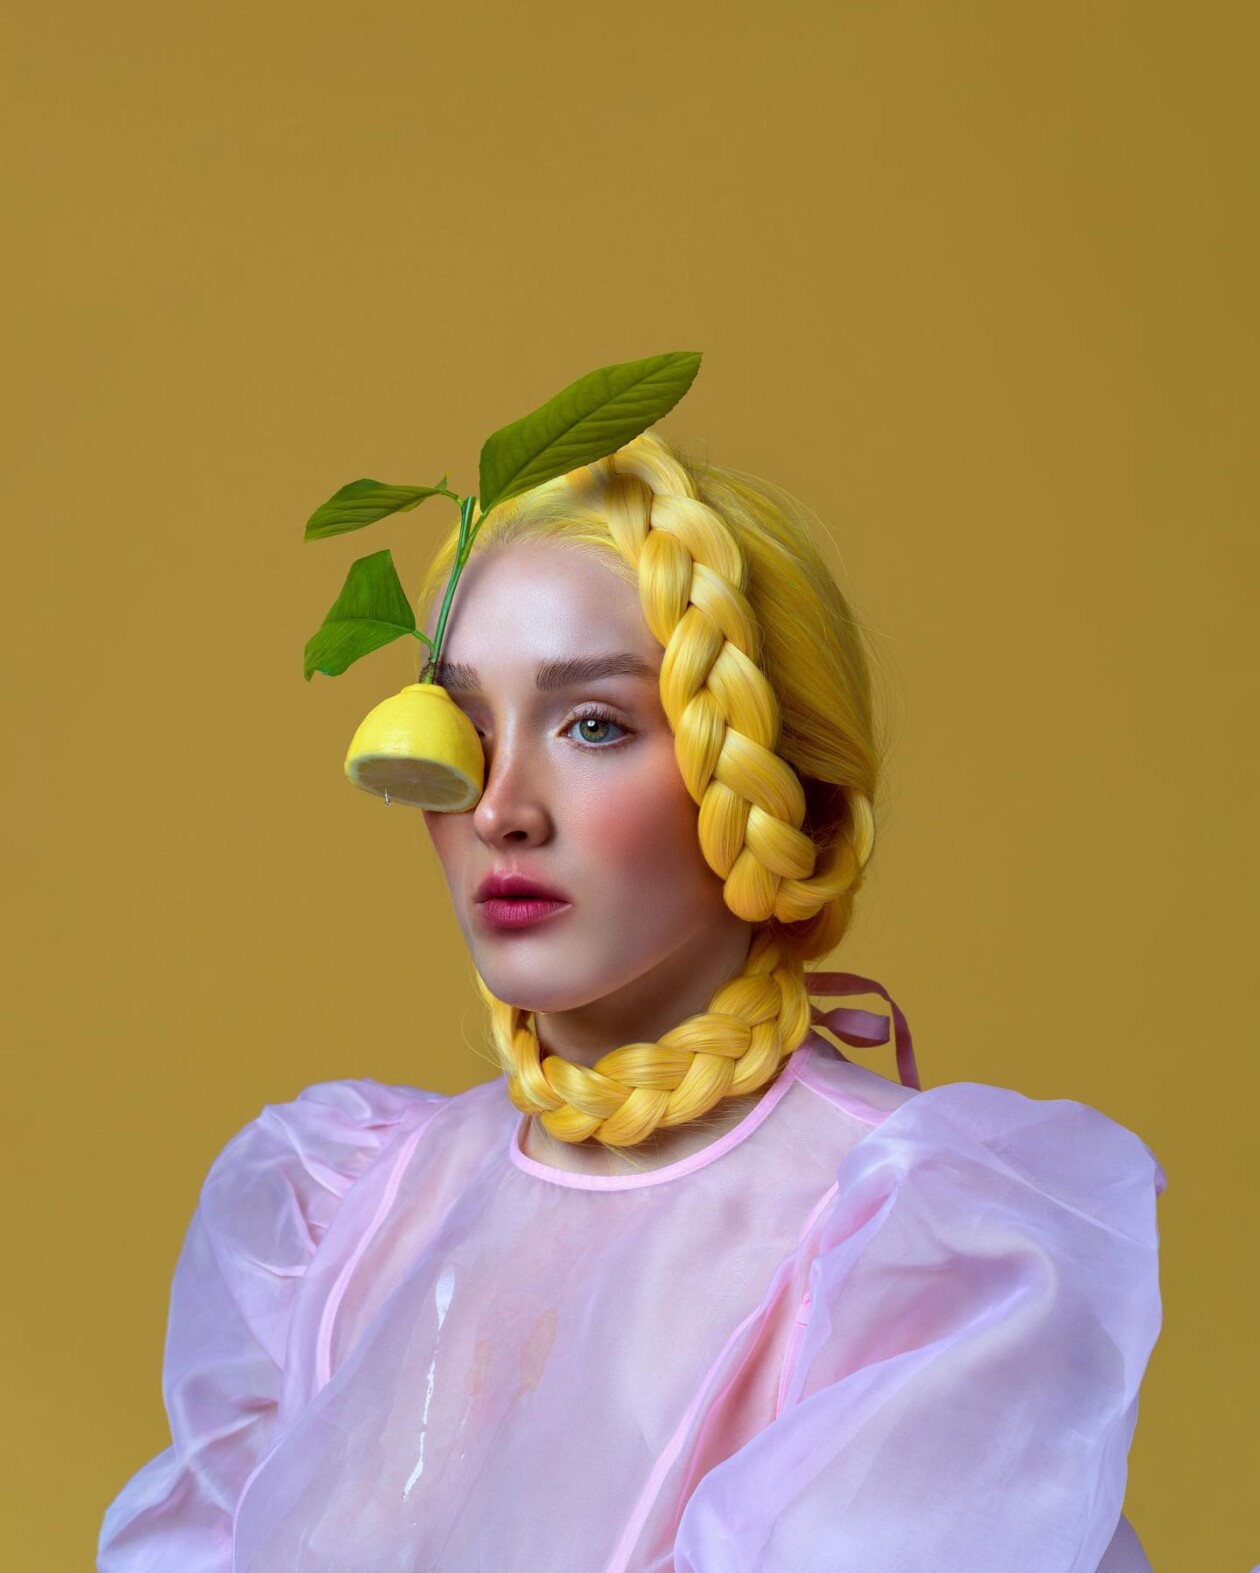 The Lushly Surreal Self Portraits Of Claire Luxton (18)